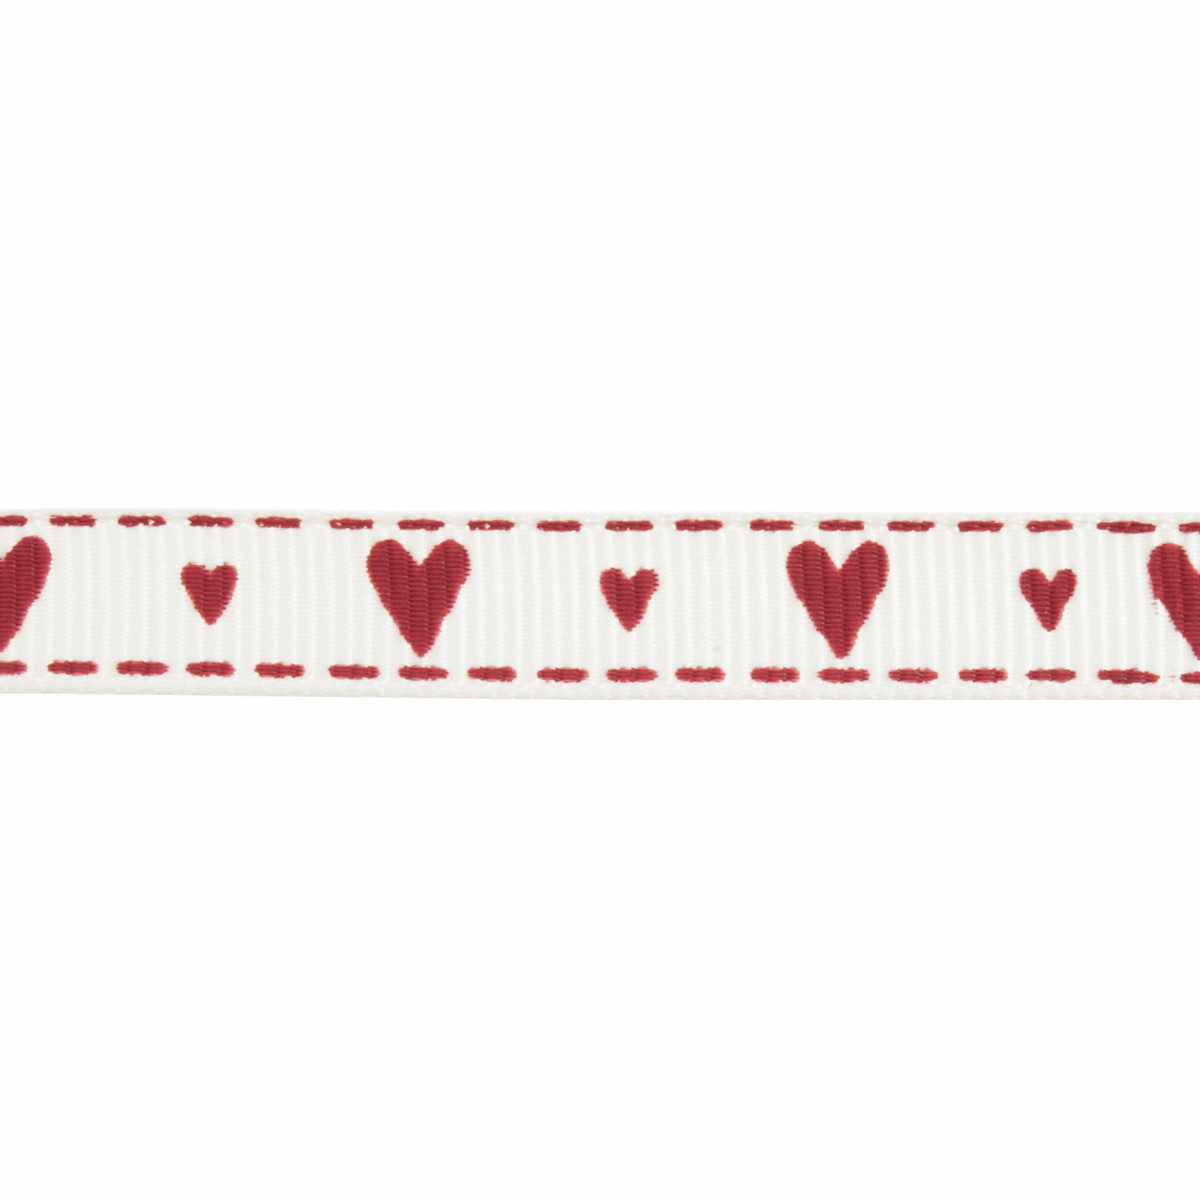 Bowtique Hearts and Kisses Grosgrain Ribbon - Dark Red & Natural - 5m x 10mm Roll